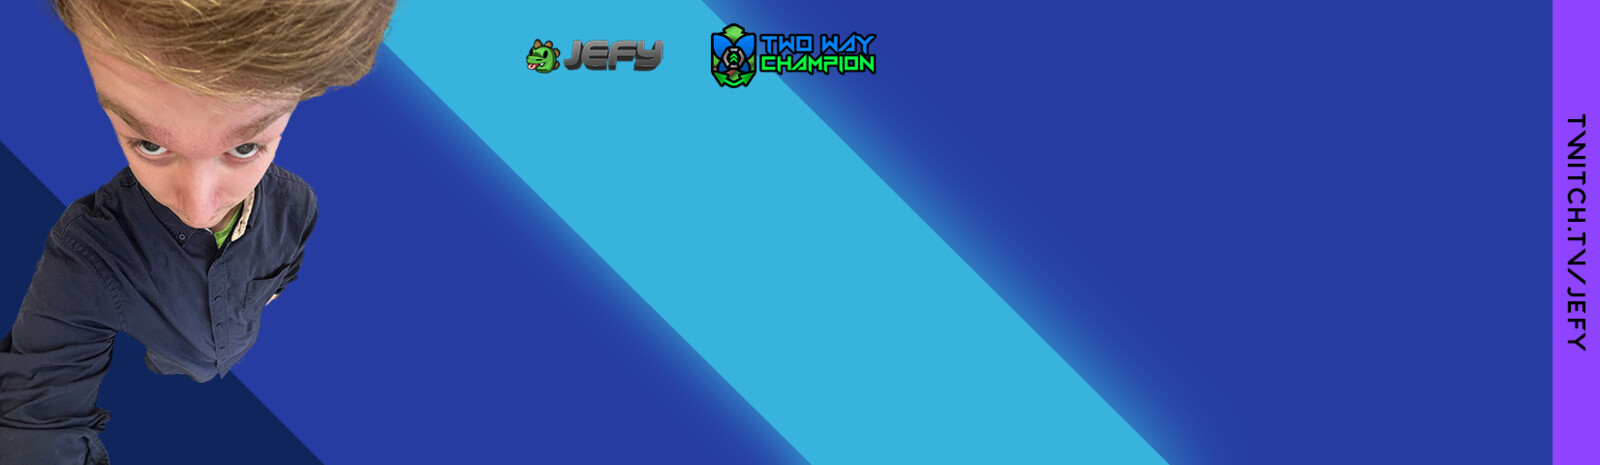 Twitch Banner for Jefy_